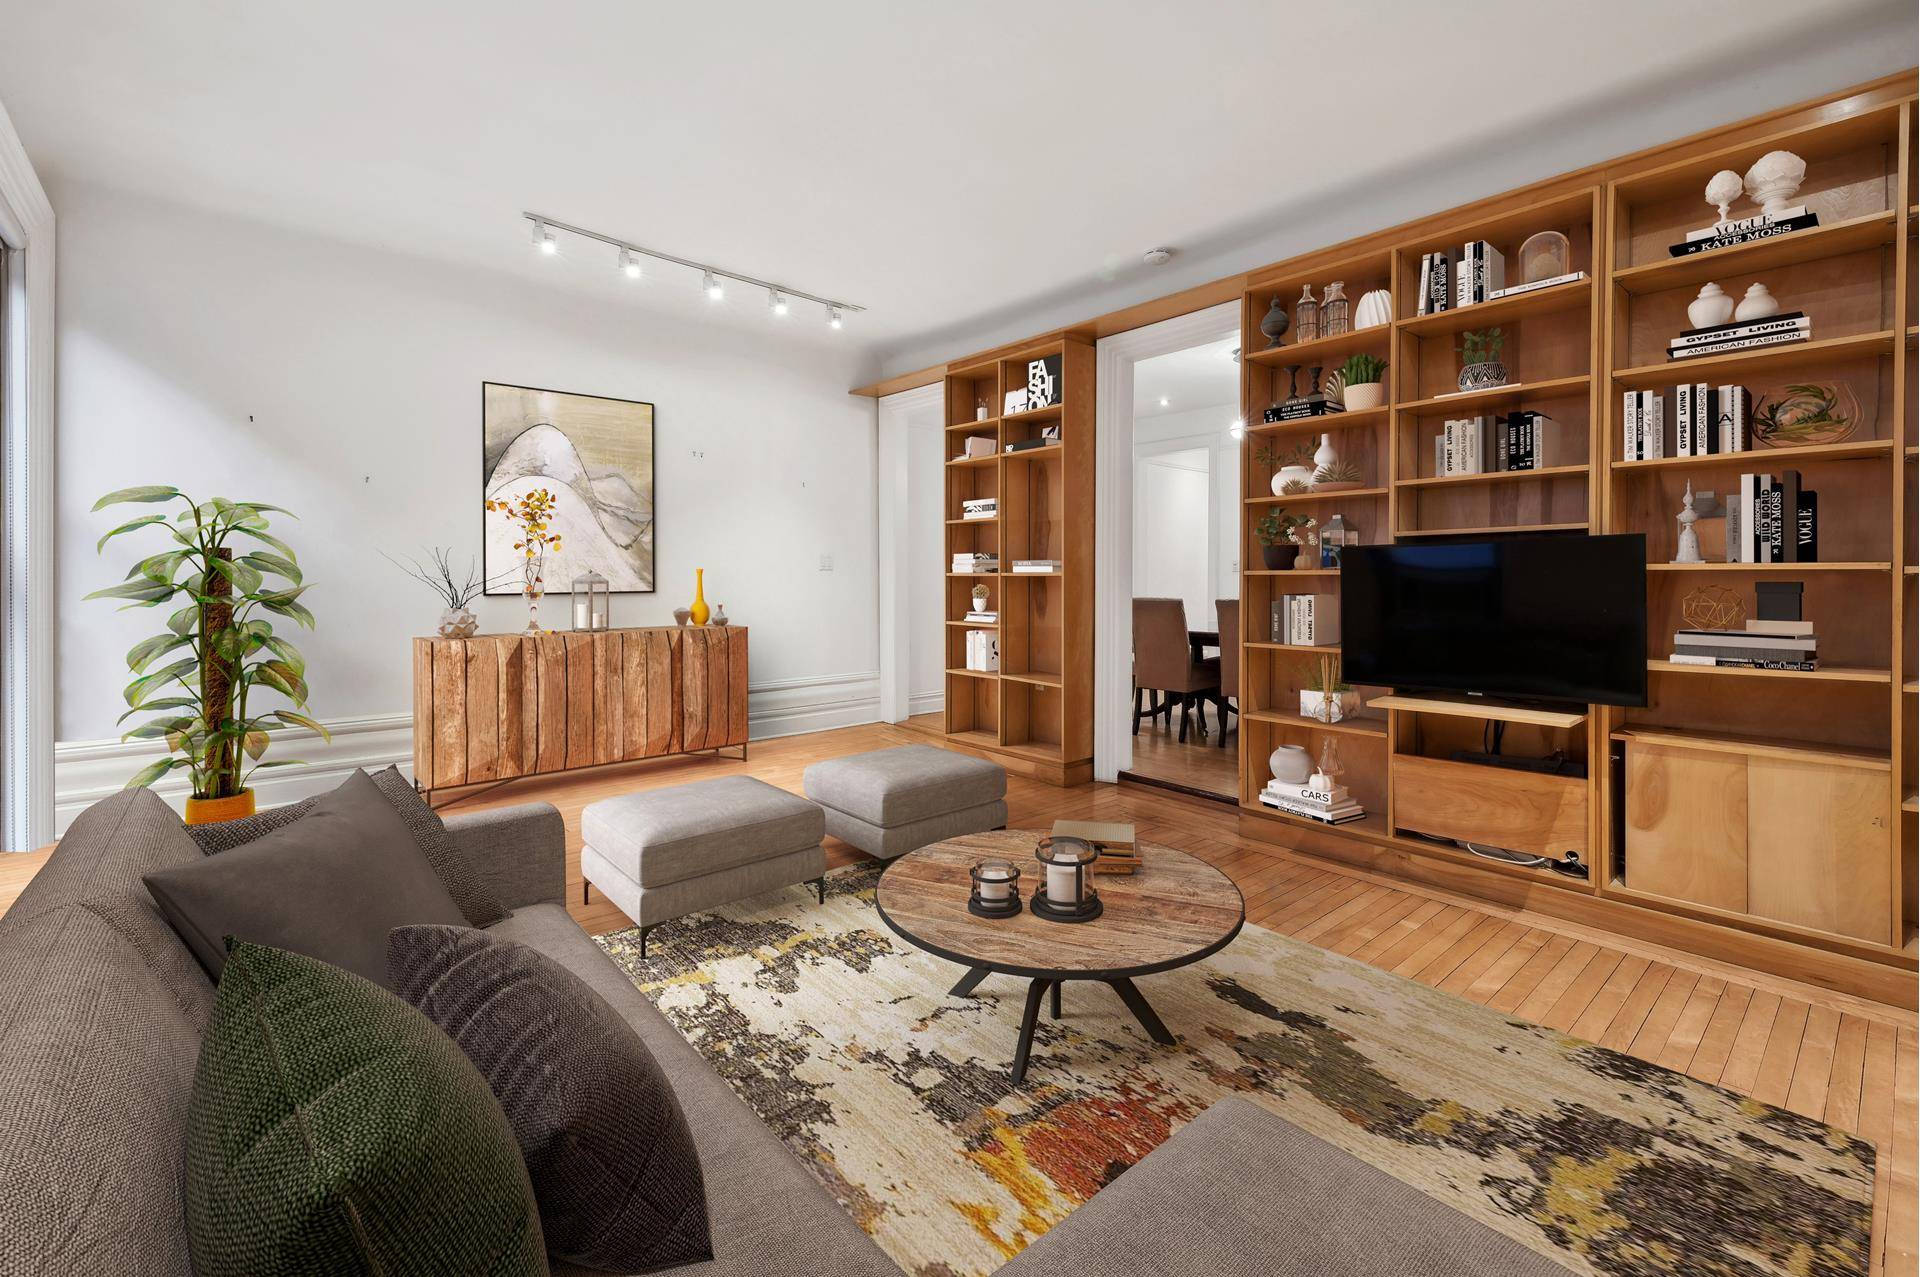 Nestled in the heart of Morningside Heights next to the prestigious Columbia University and the rich culture history of the community ; Apartment 43 welcomes you to the epitome of ...